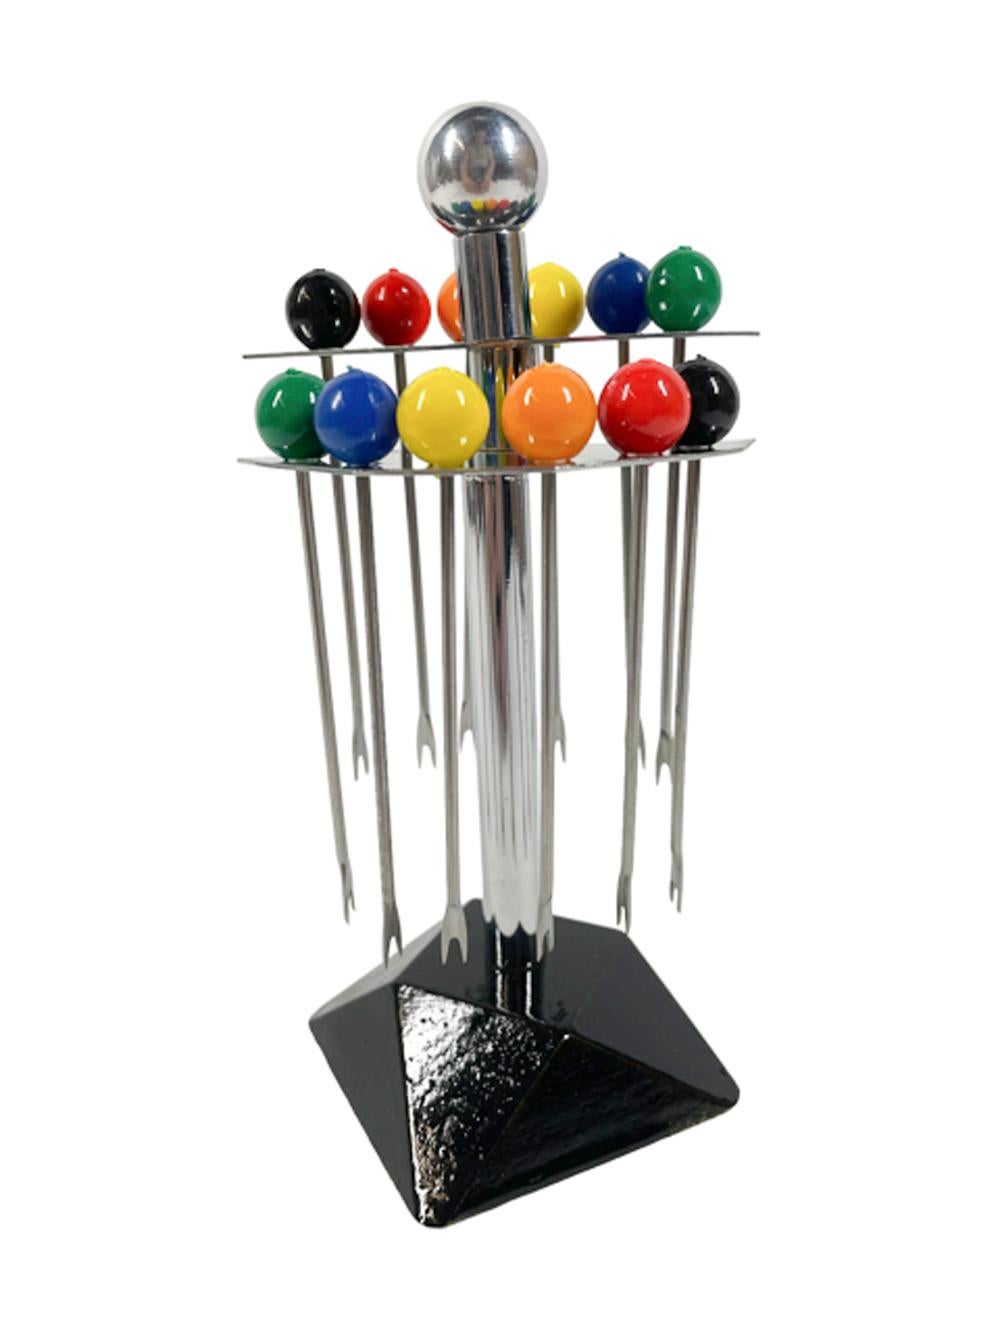 Set of 12 Art Deco Bakelite topped cocktail picks consisting of 2 each of six colored ball finials with chrome forked picks in a chrome stand with 2 semi-circular tiers holding 6 each on a ball topped chrome post with an ebonized geometric wood base.